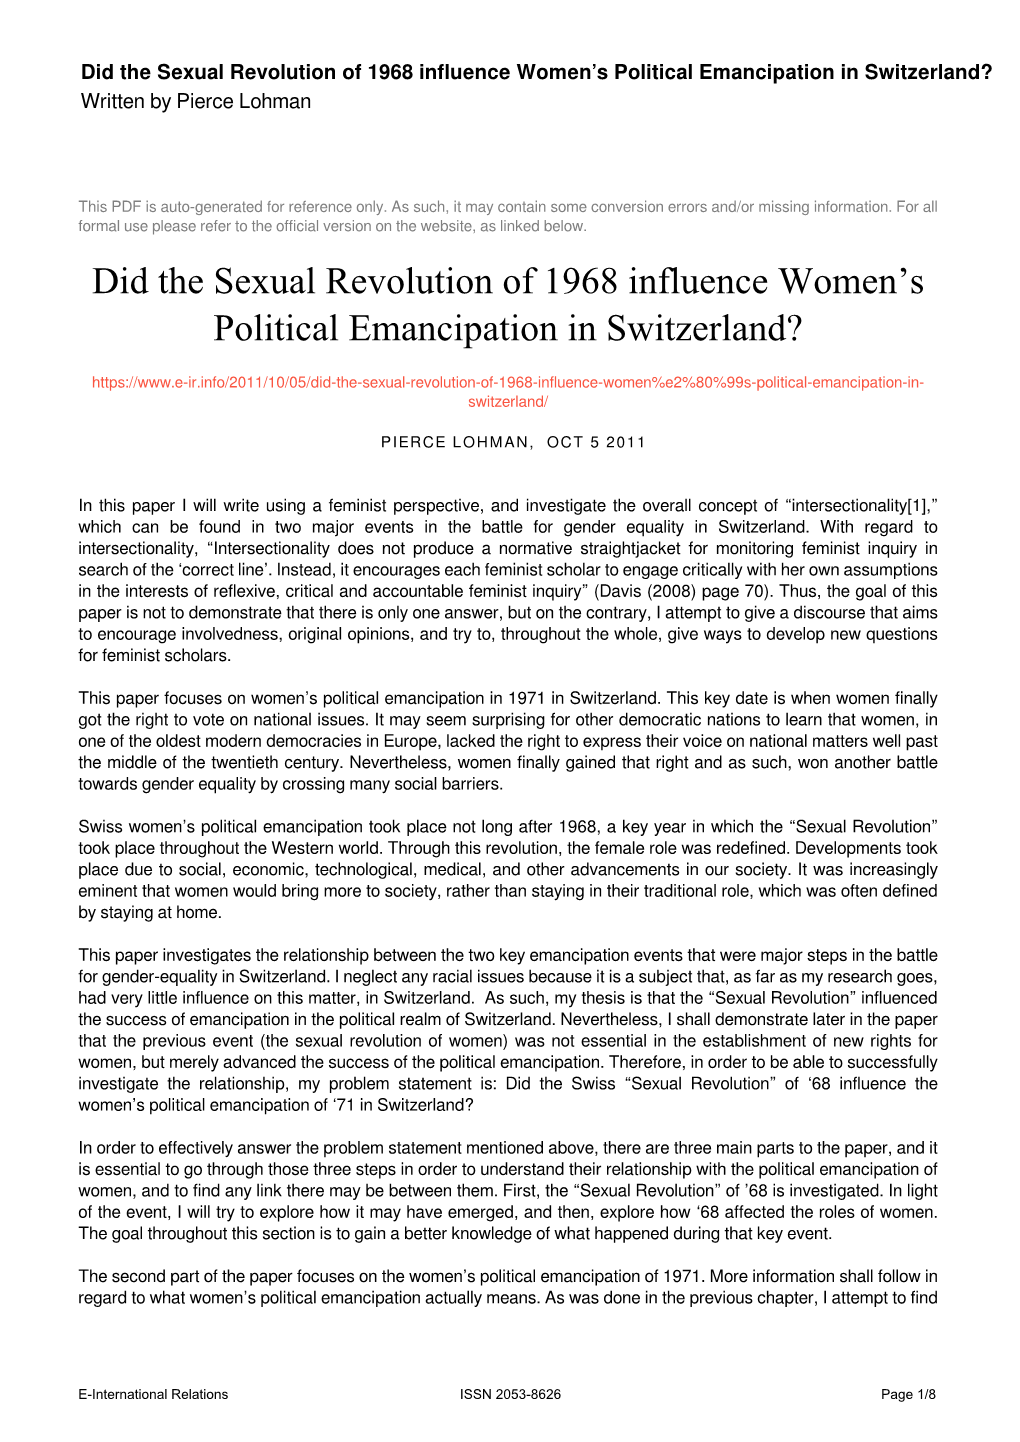 Did the Sexual Revolution of 1968 Influence Women's Political